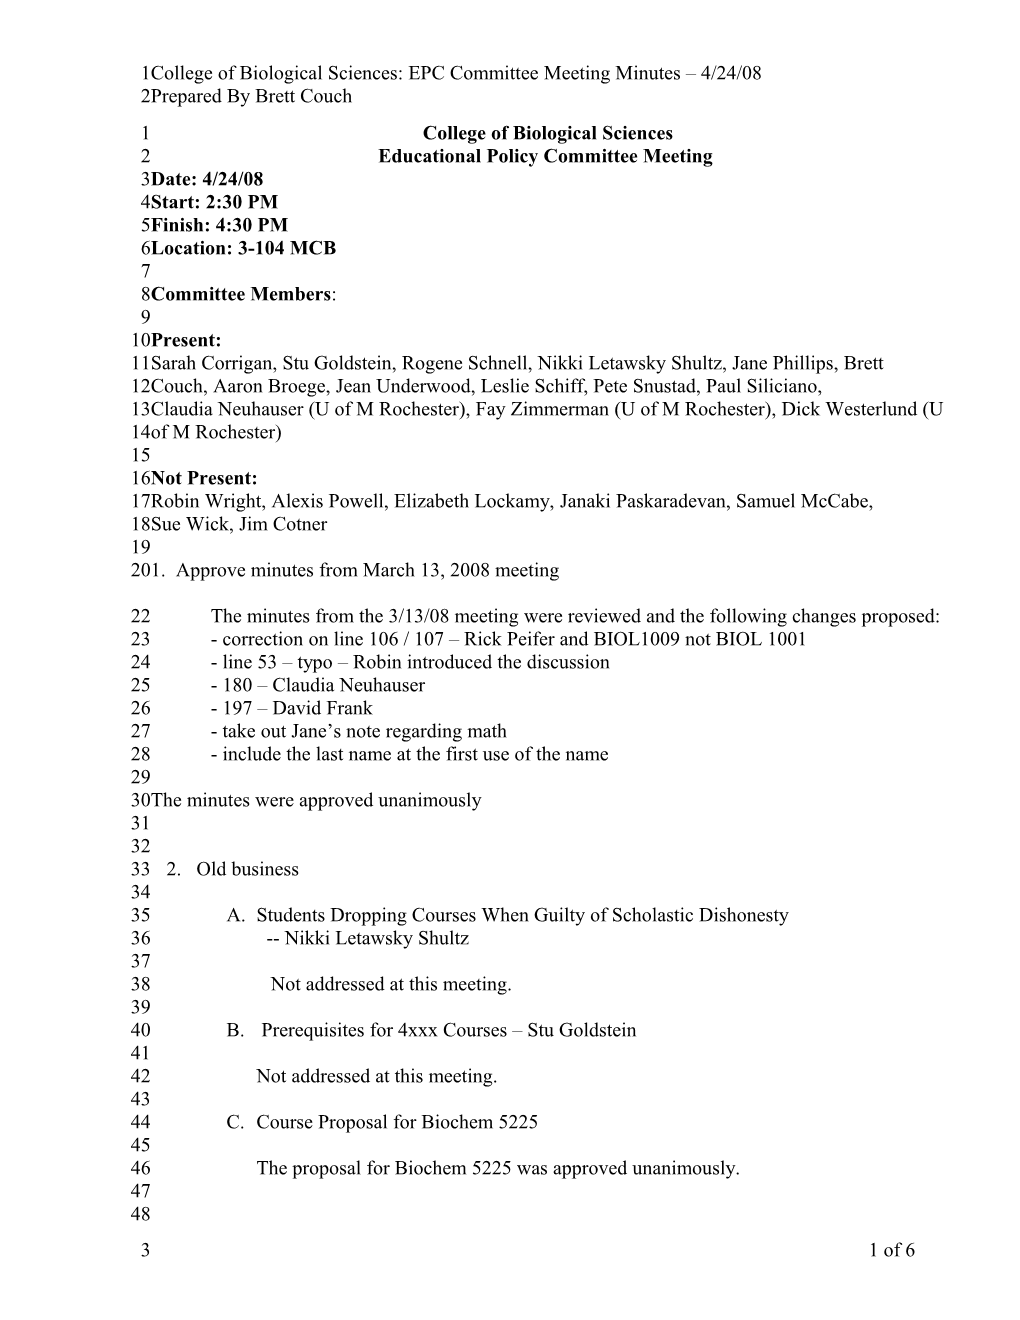 College of Biological Sciences: EPC Committee Meeting Minutes 4/24/08